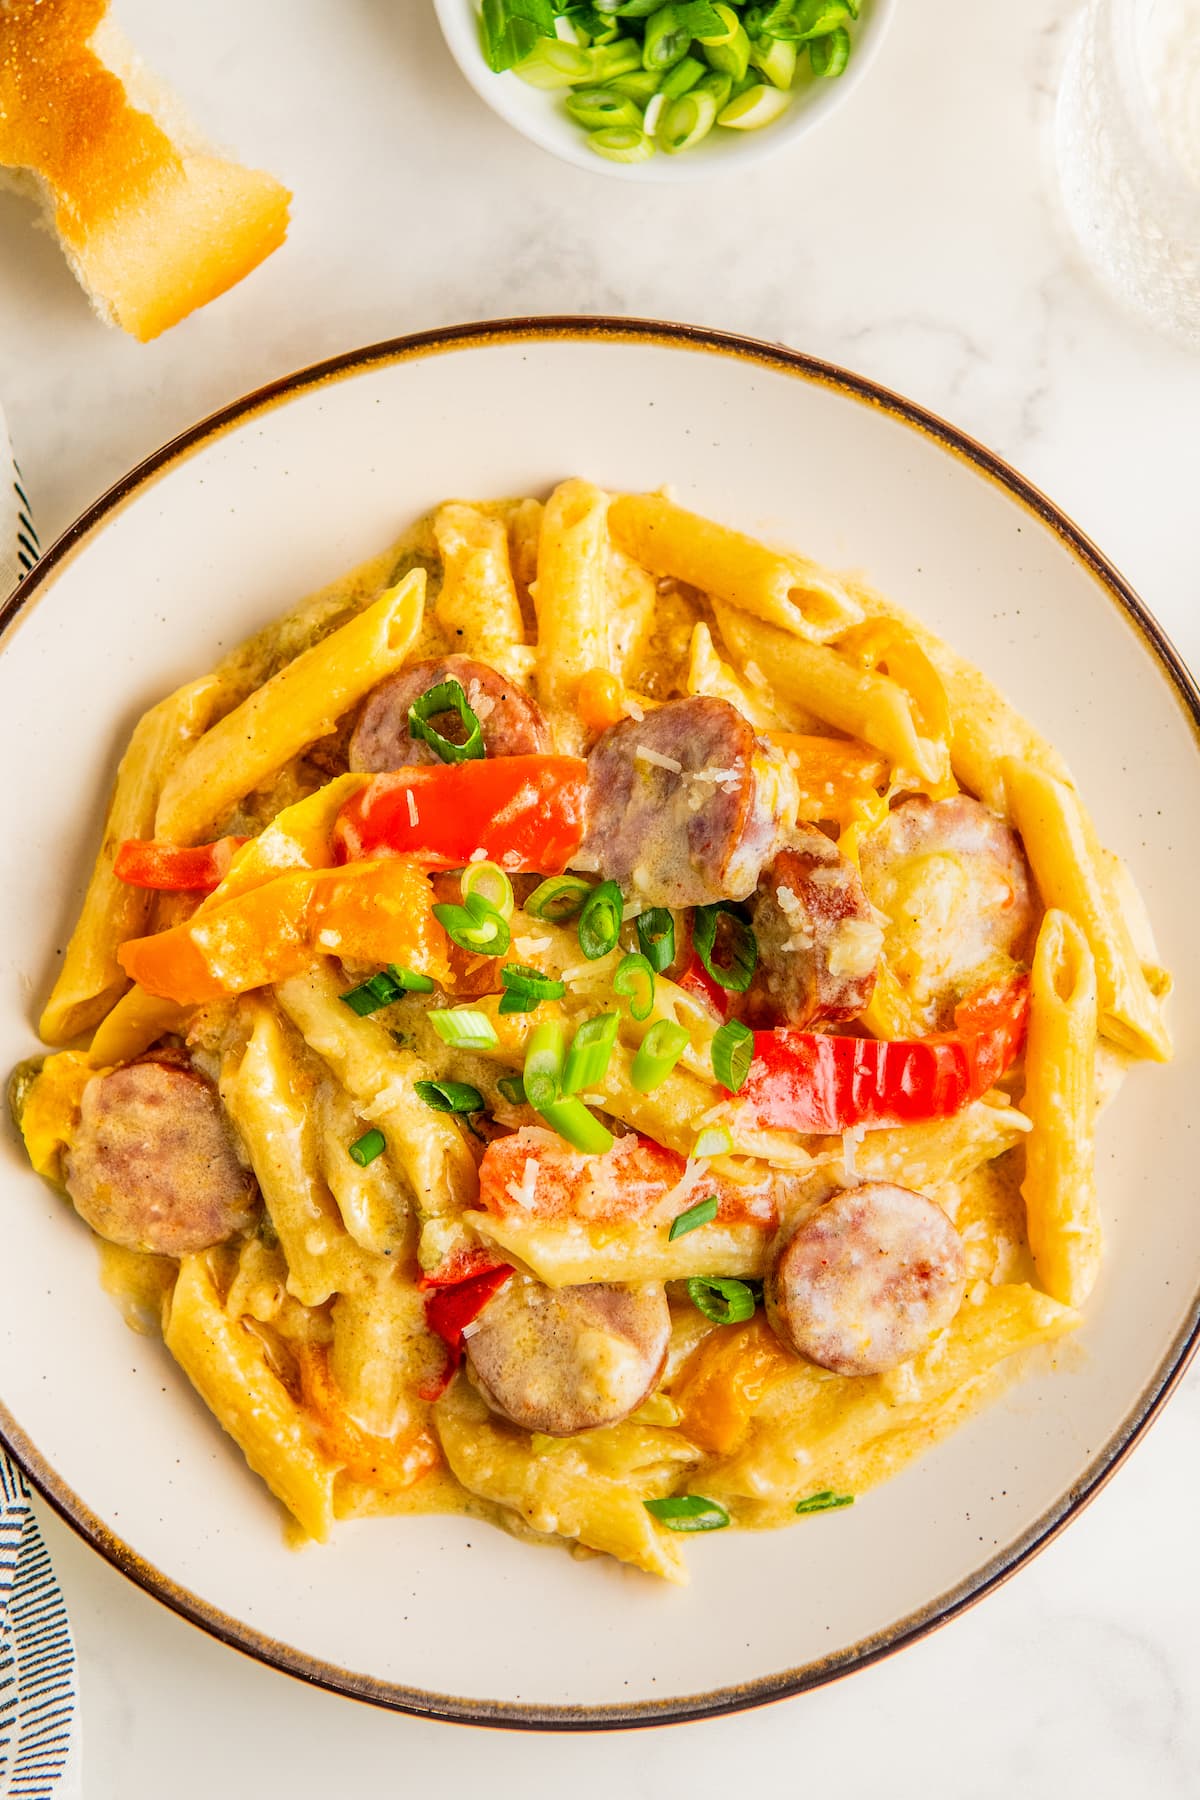 A plate of creamy Cajun sausage pasta with colorful bell peppers.